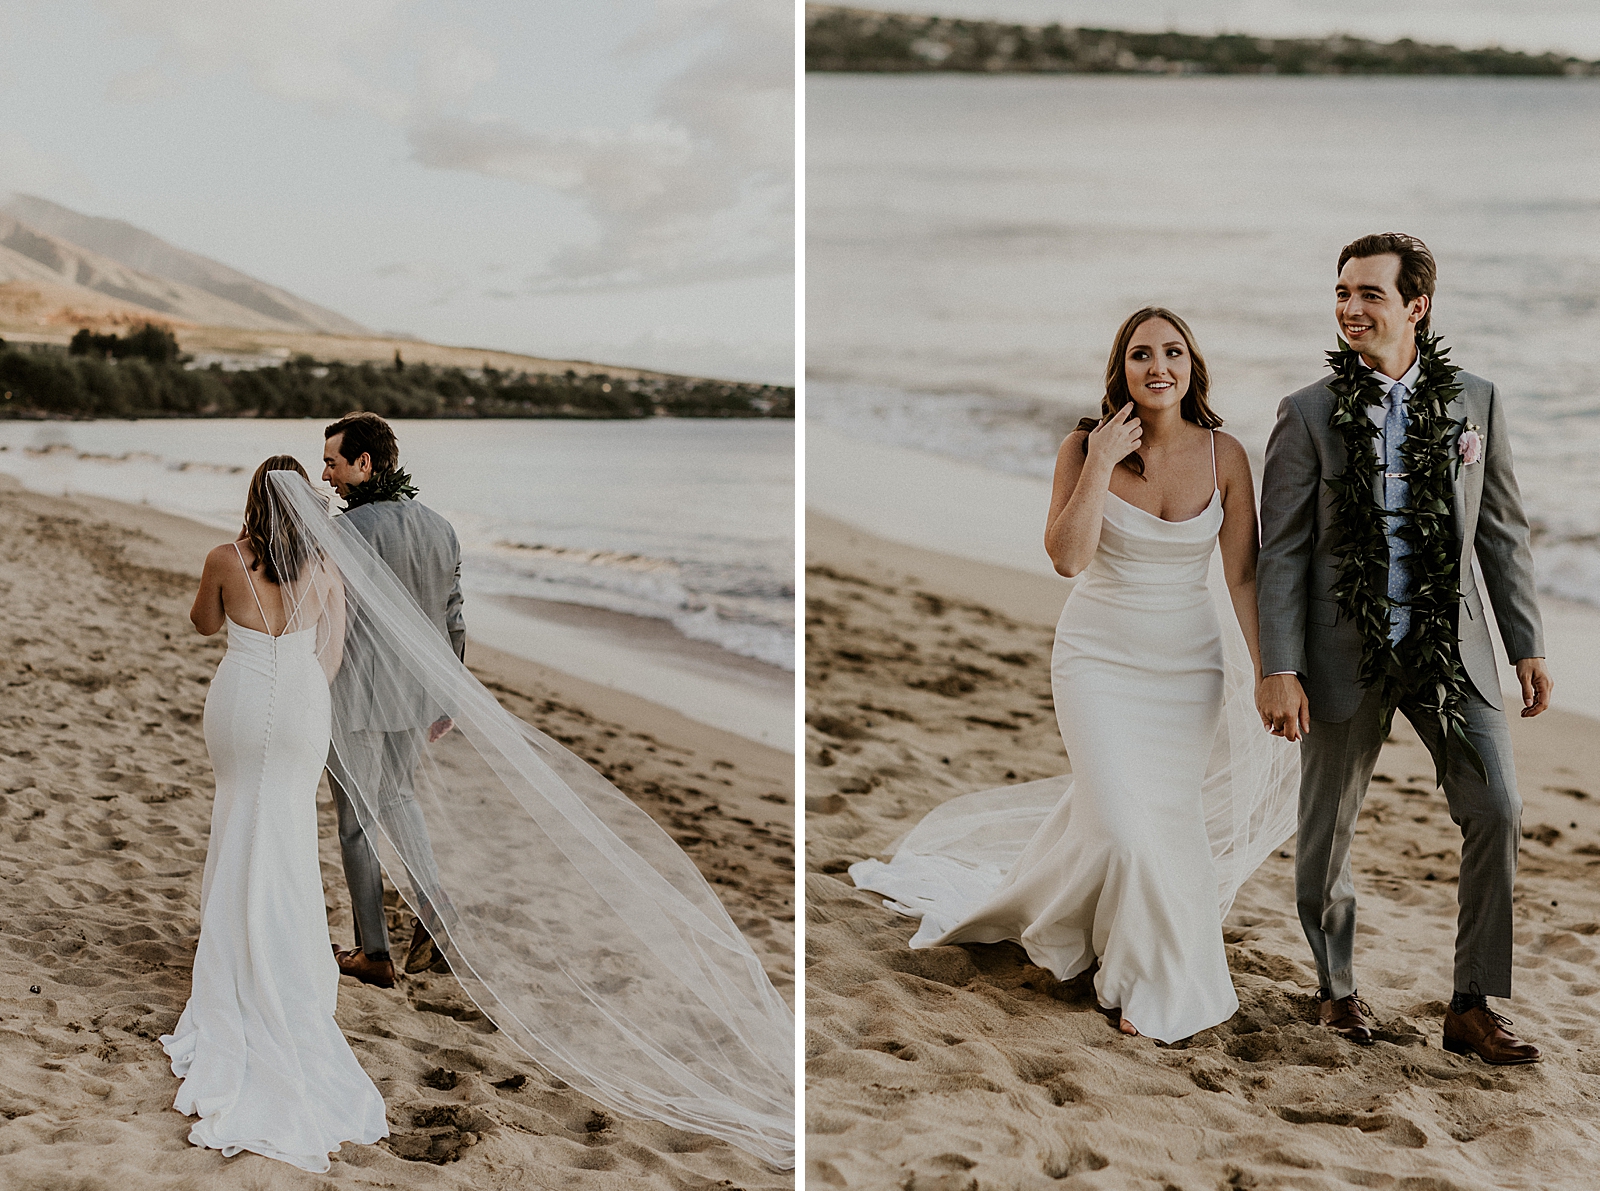 Bride and Groom holding hands and walking by the ocean shoreline